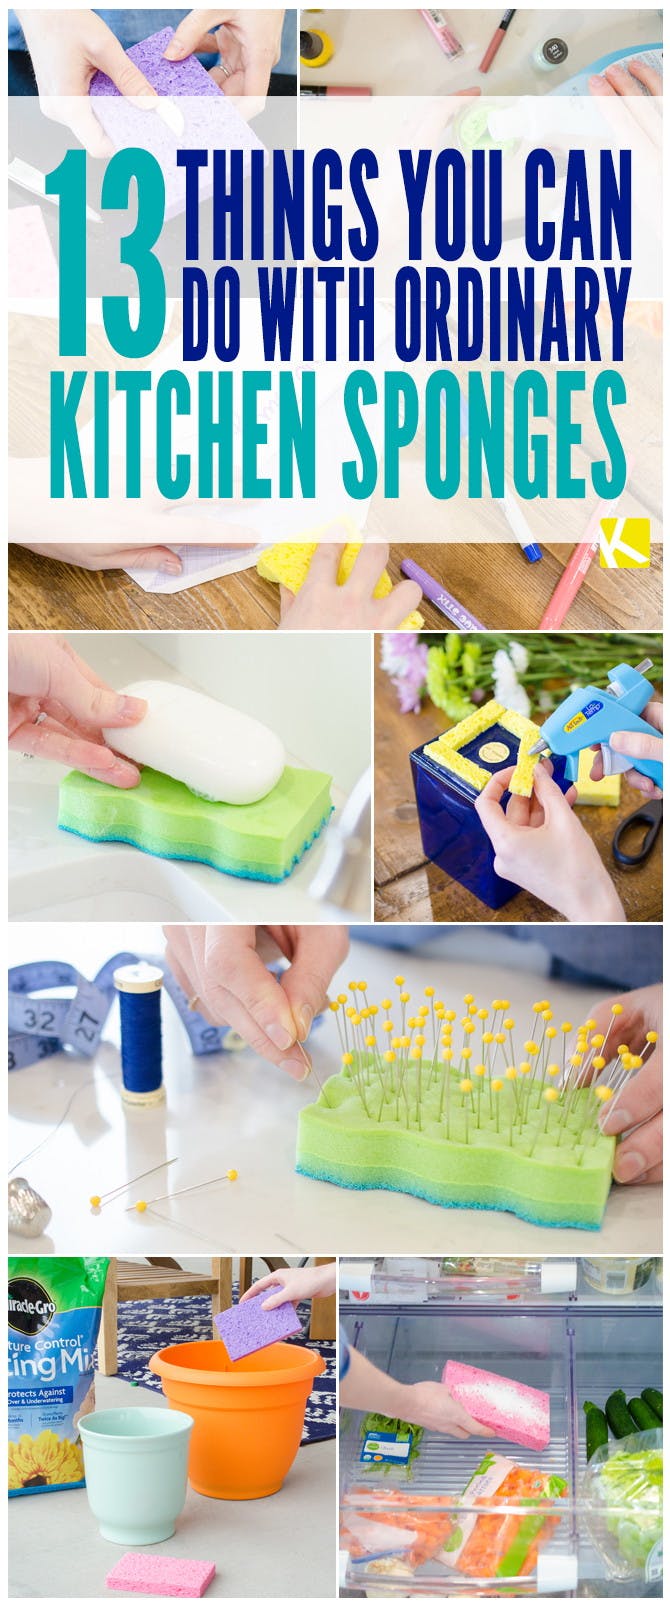 13 Ways to Use a Sponge That You've Never Thought of Before!